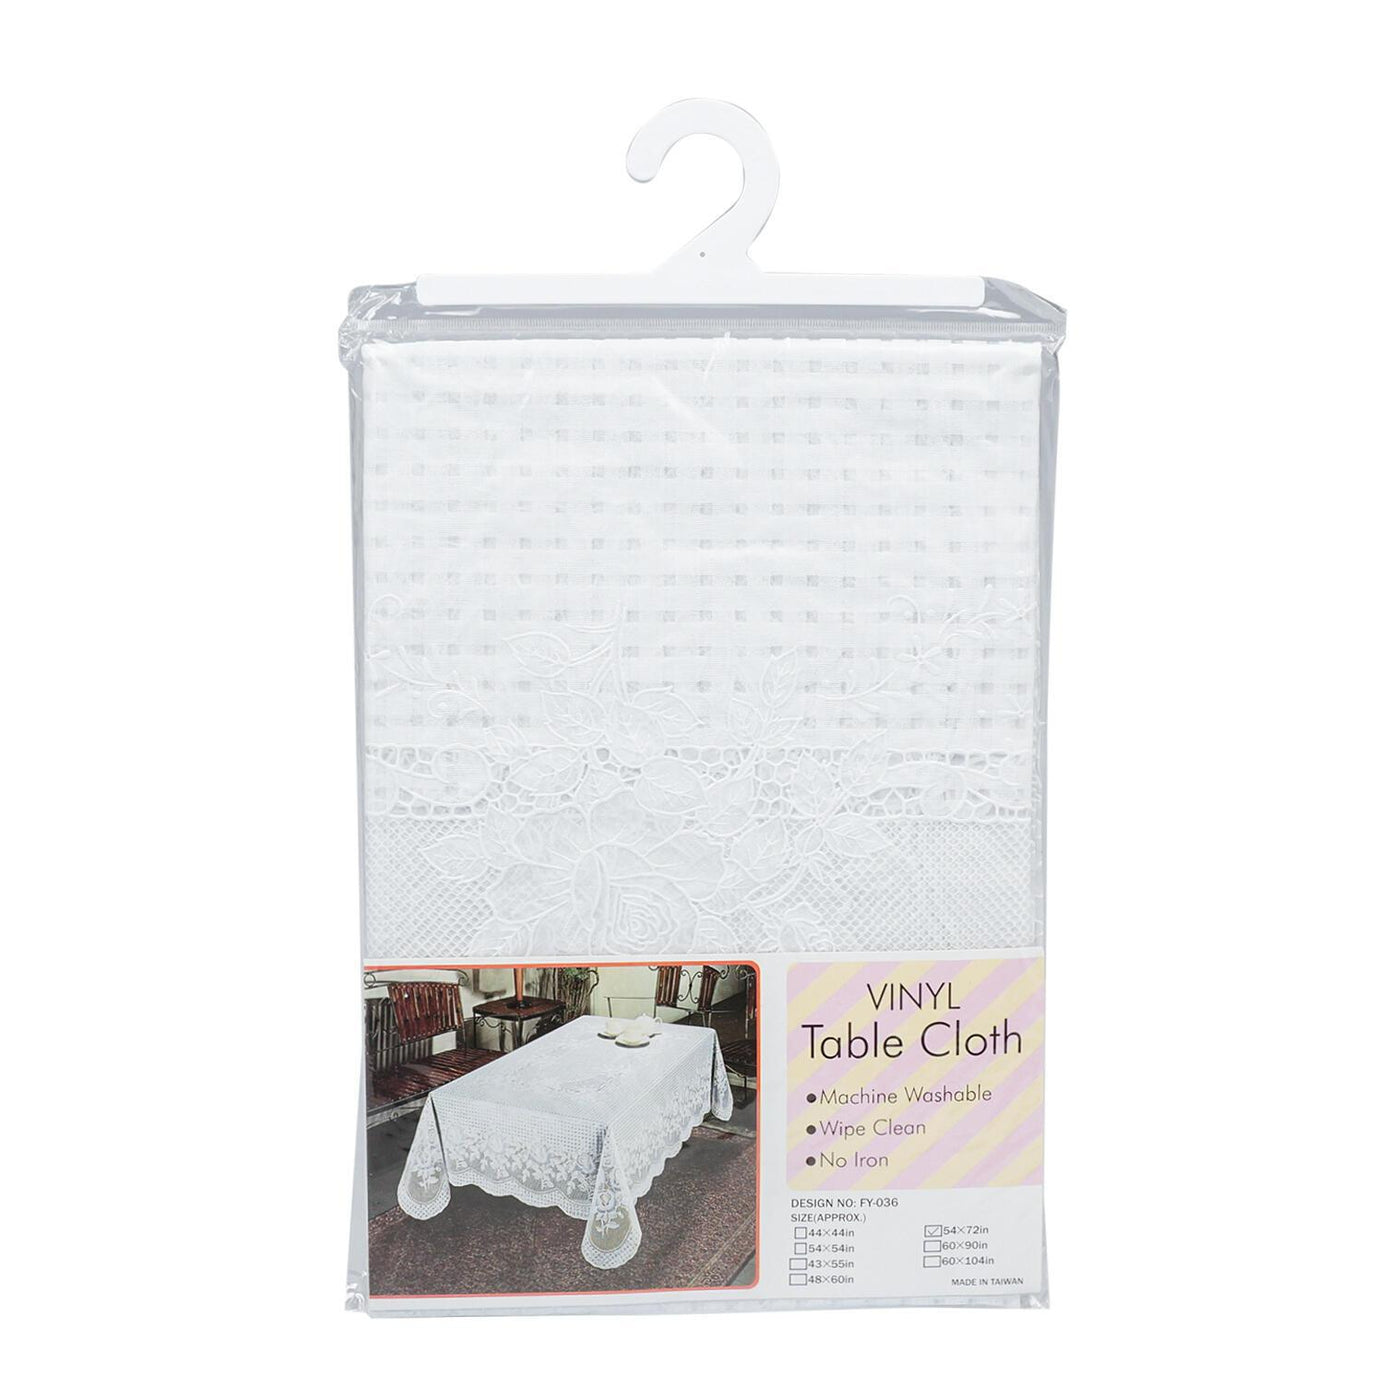 72" White Vinyl Tablecloth (1 Count) - Set With Style